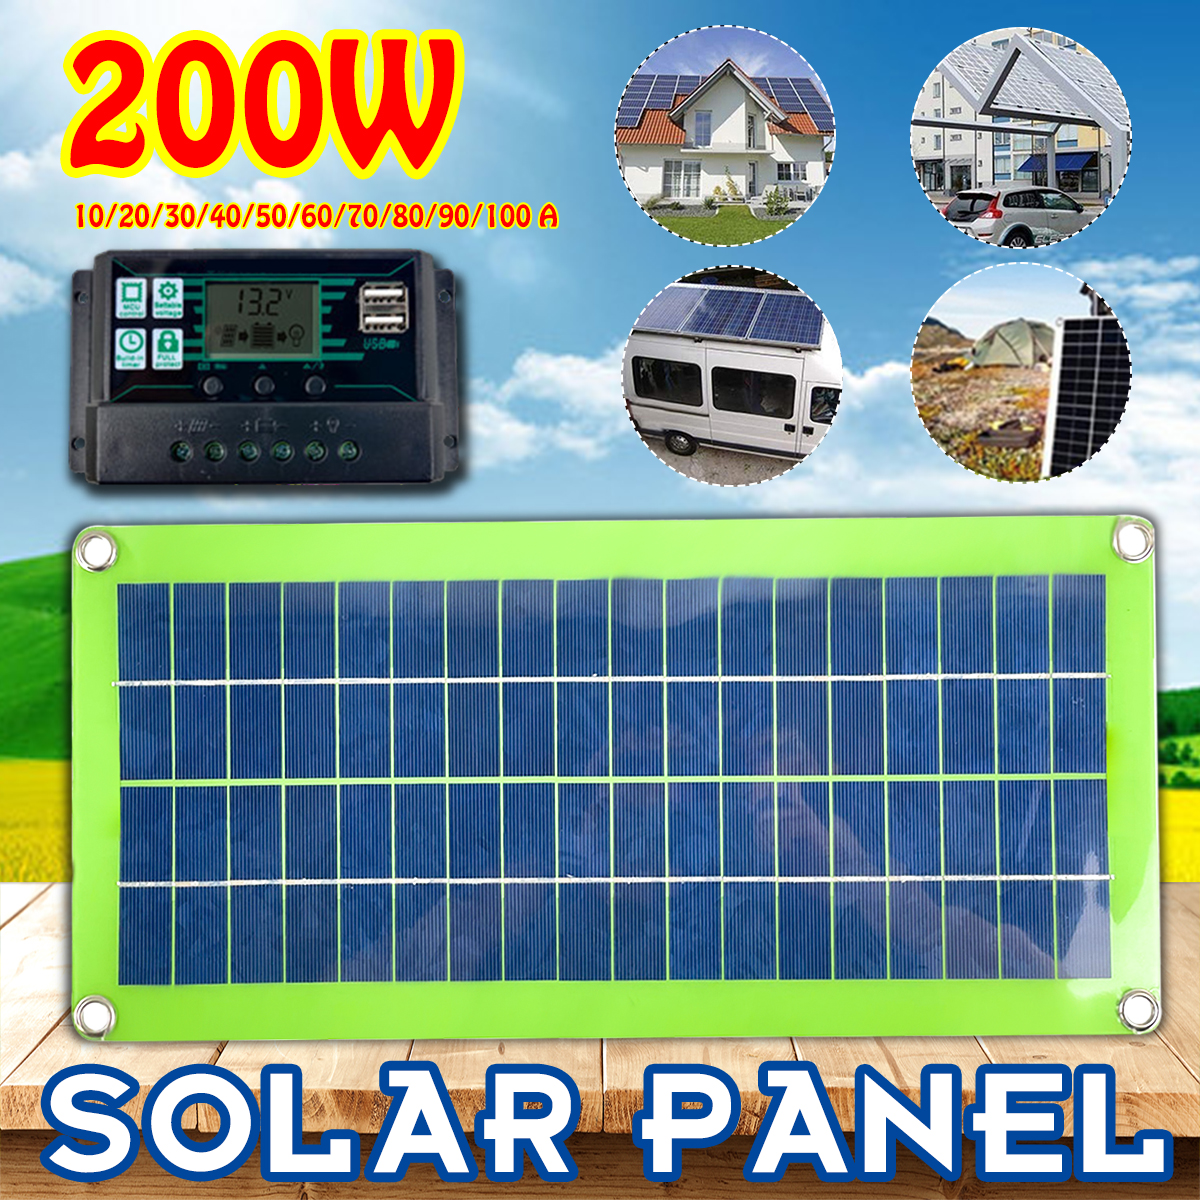 DC-200W-18V-Solar-Panel-Kit-Double-USB-Port-Controller-Power-Bank-Portable-Battery-Charger-for-Outdo-1812074-1